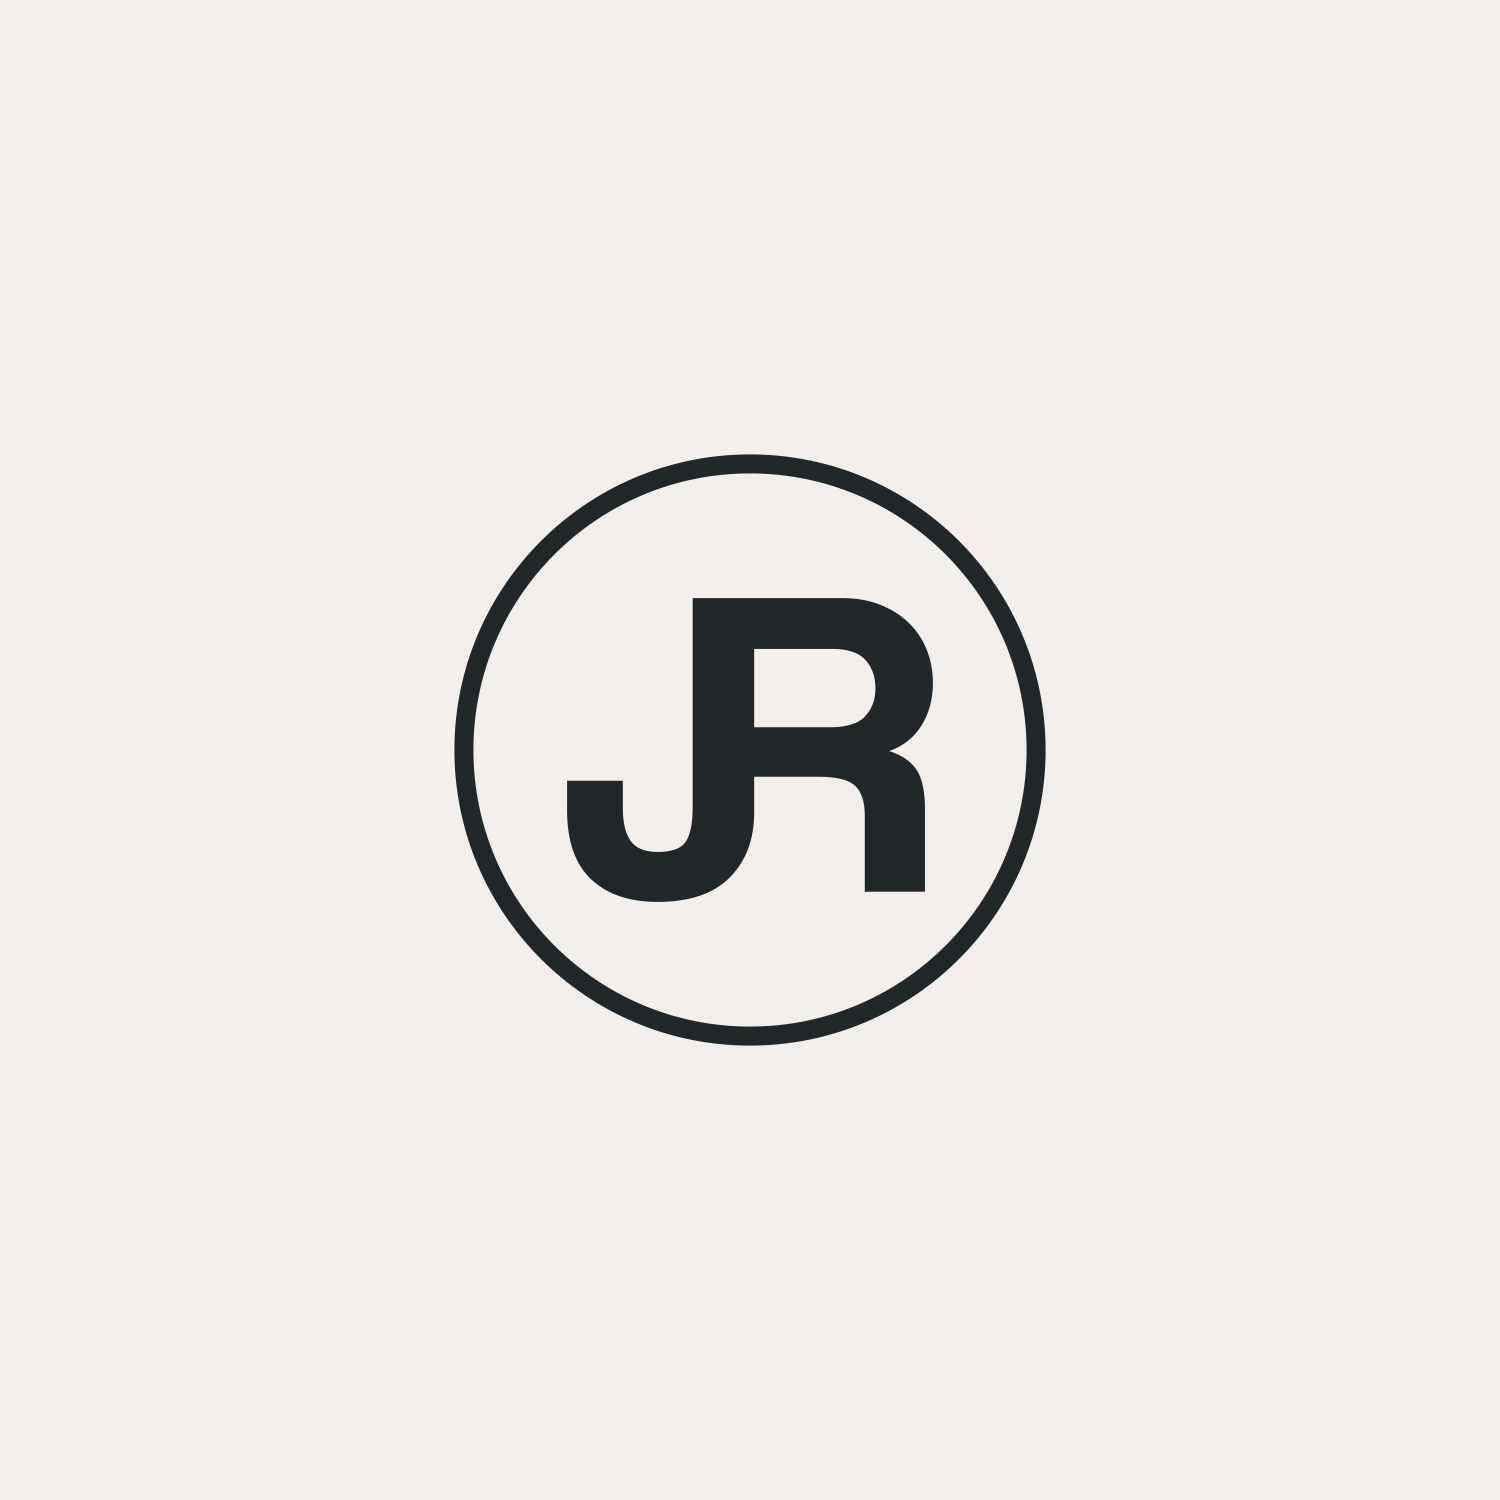 Andrea Logo - Modern, Conservative Logo Design for JR the initials of the name of ...